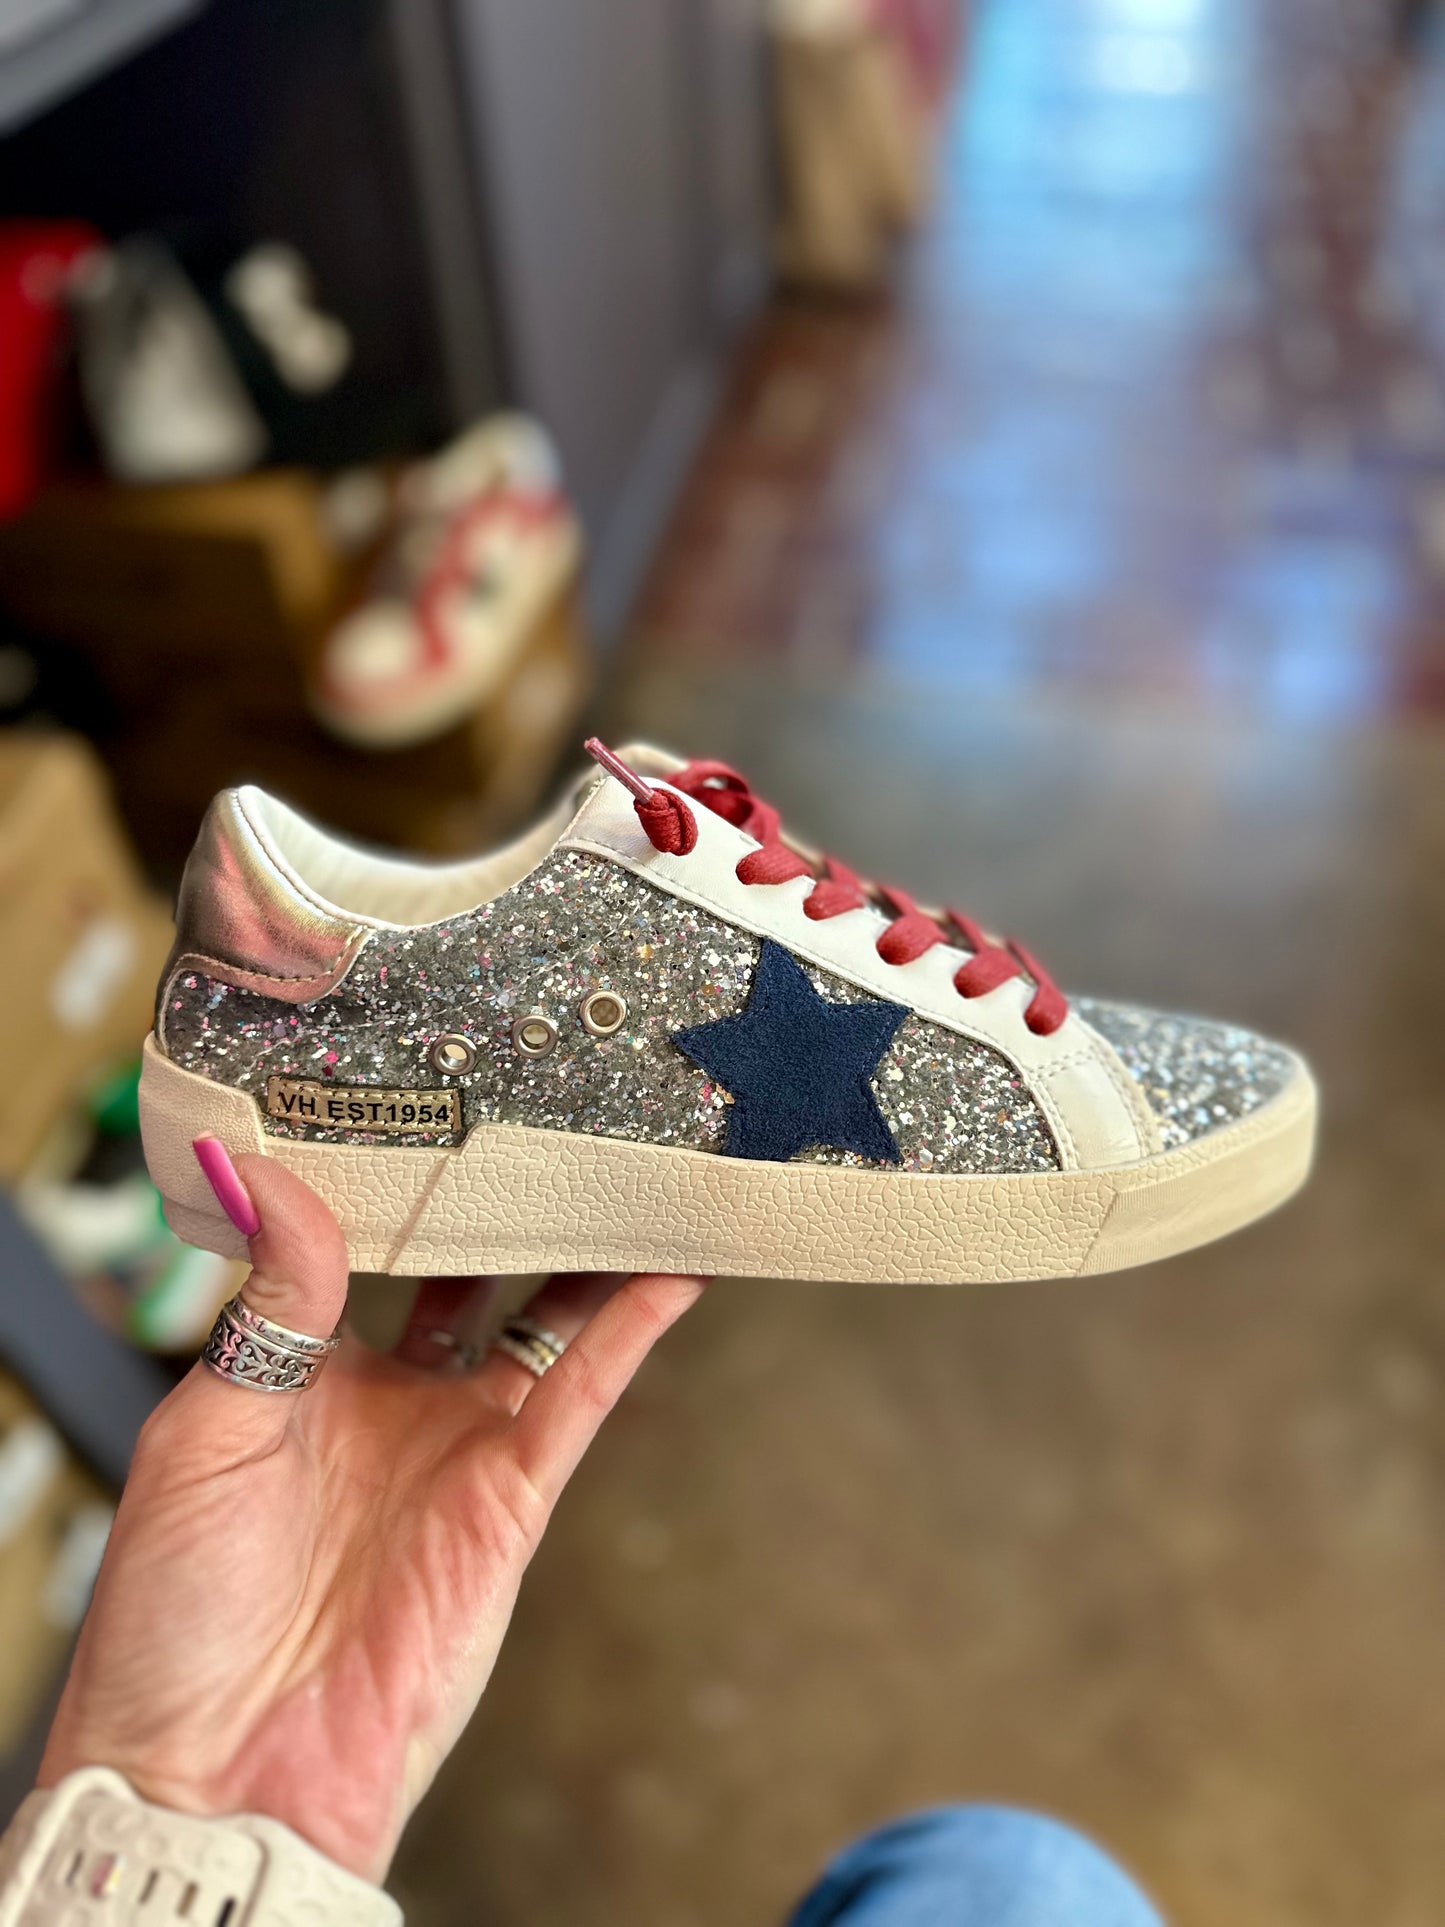 The Evie Sneakers